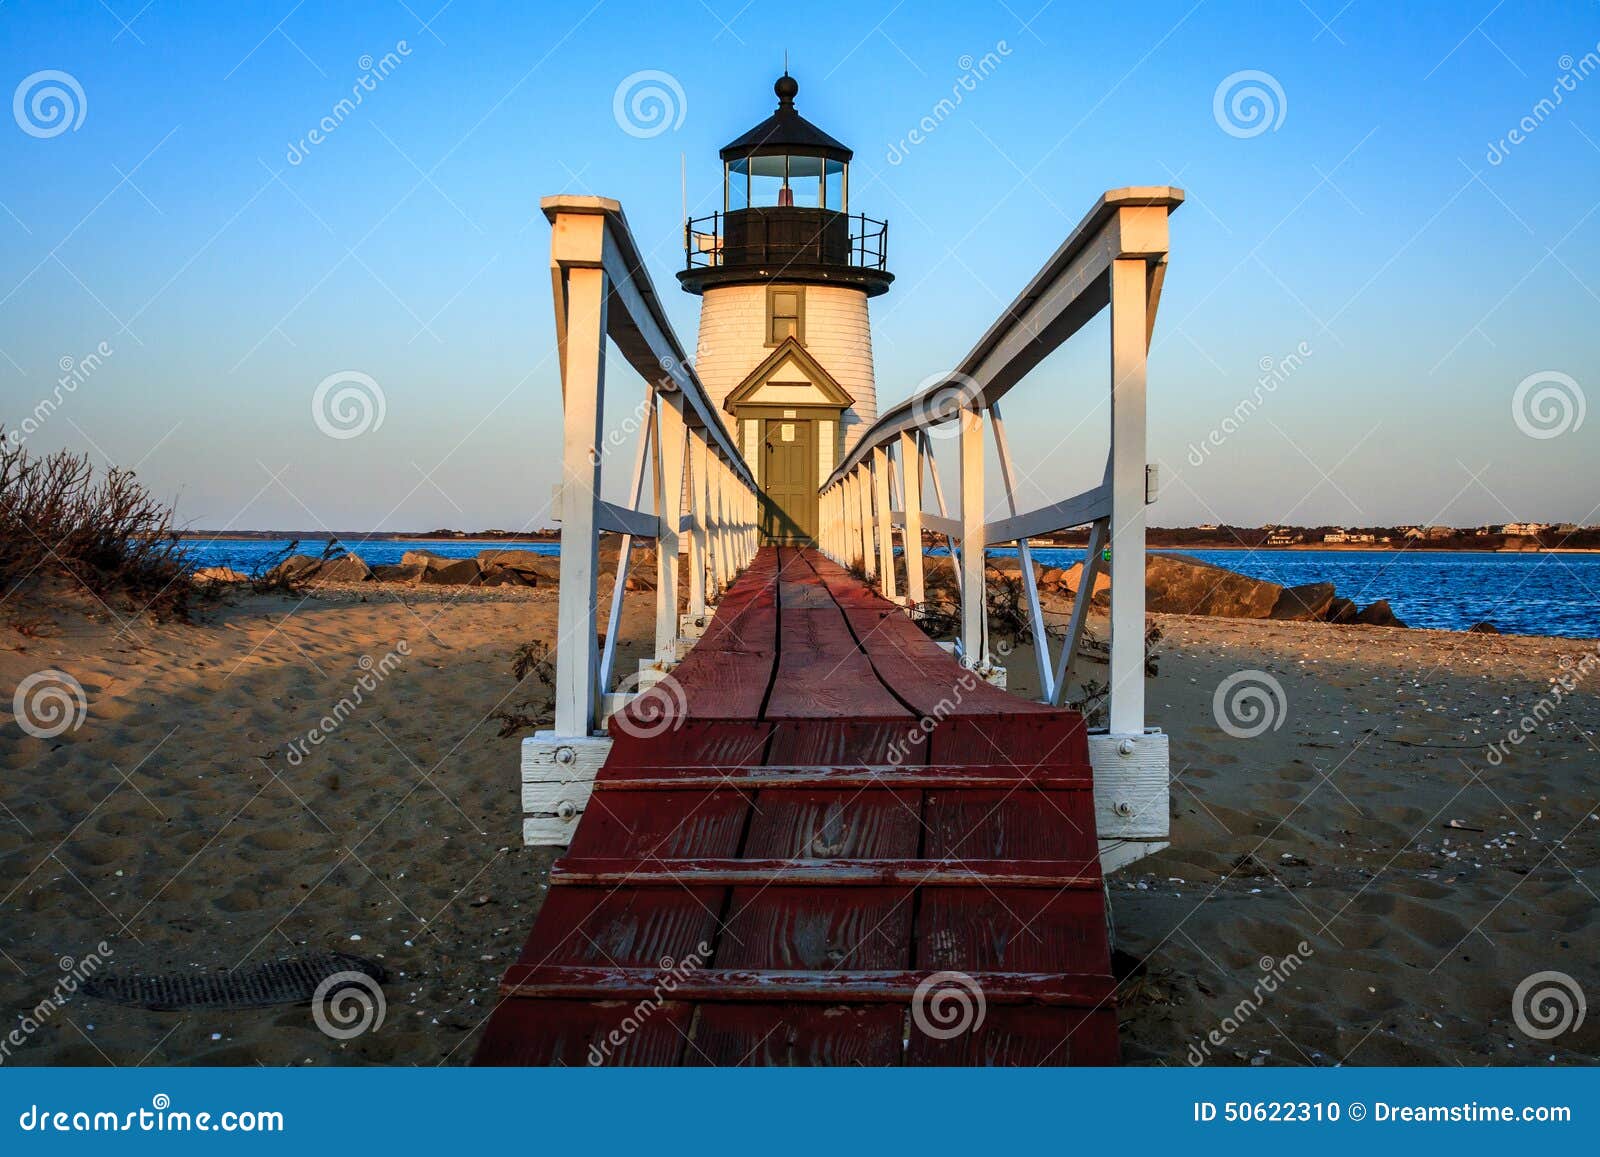 lighthouse guarding the harbor